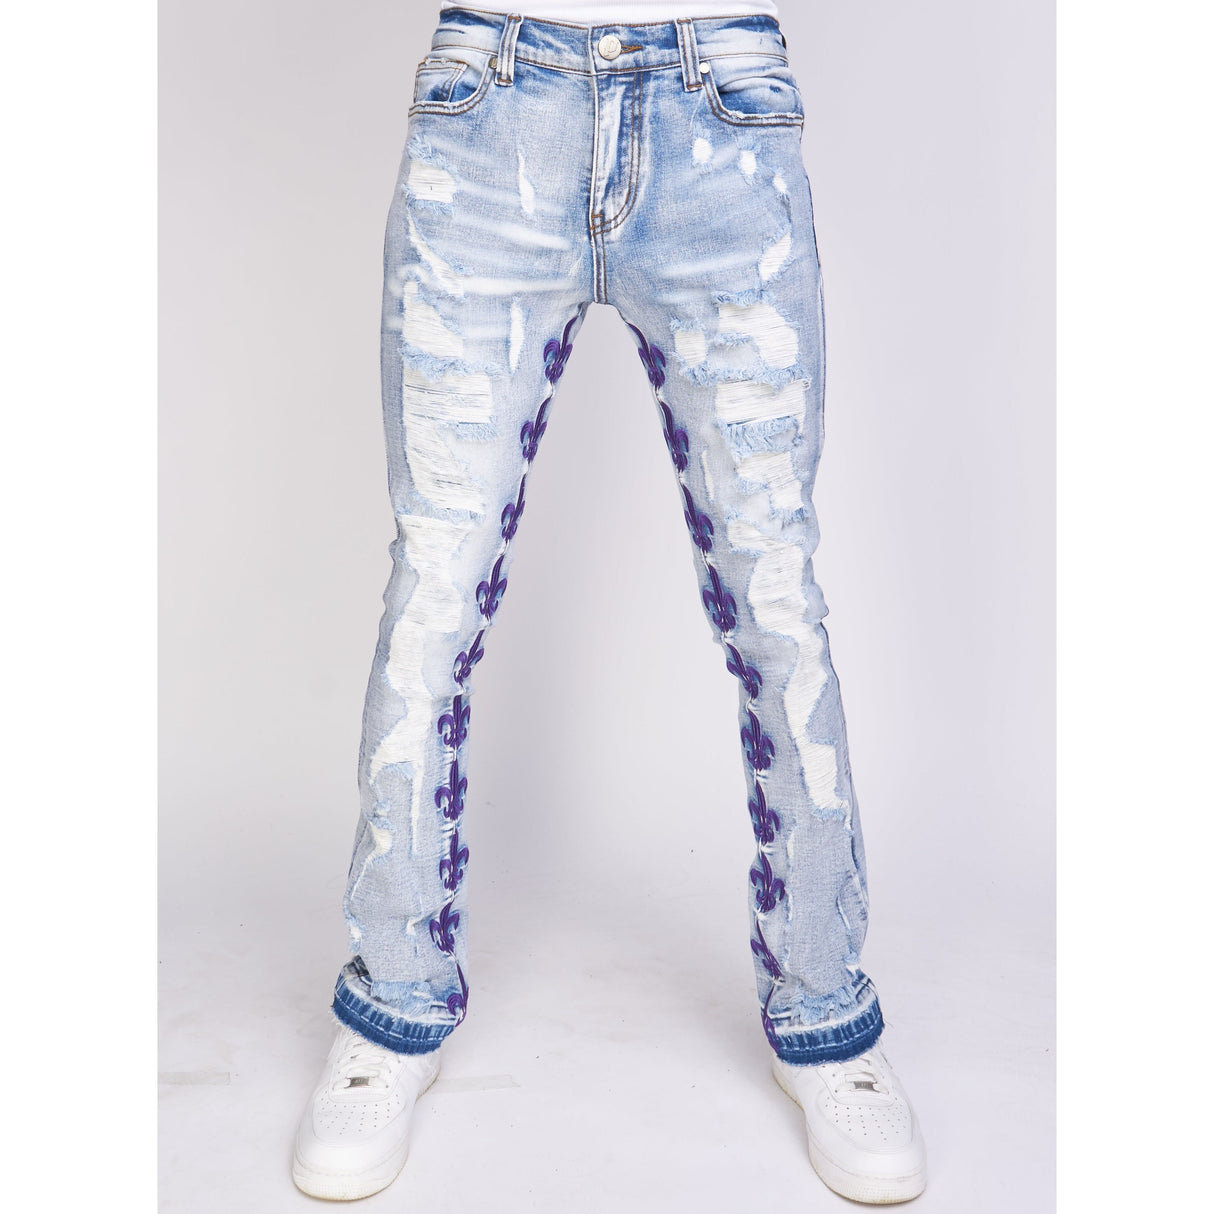 Politics Jeans - Stacked Embroidery - Light Blue and Purple - Barkley502